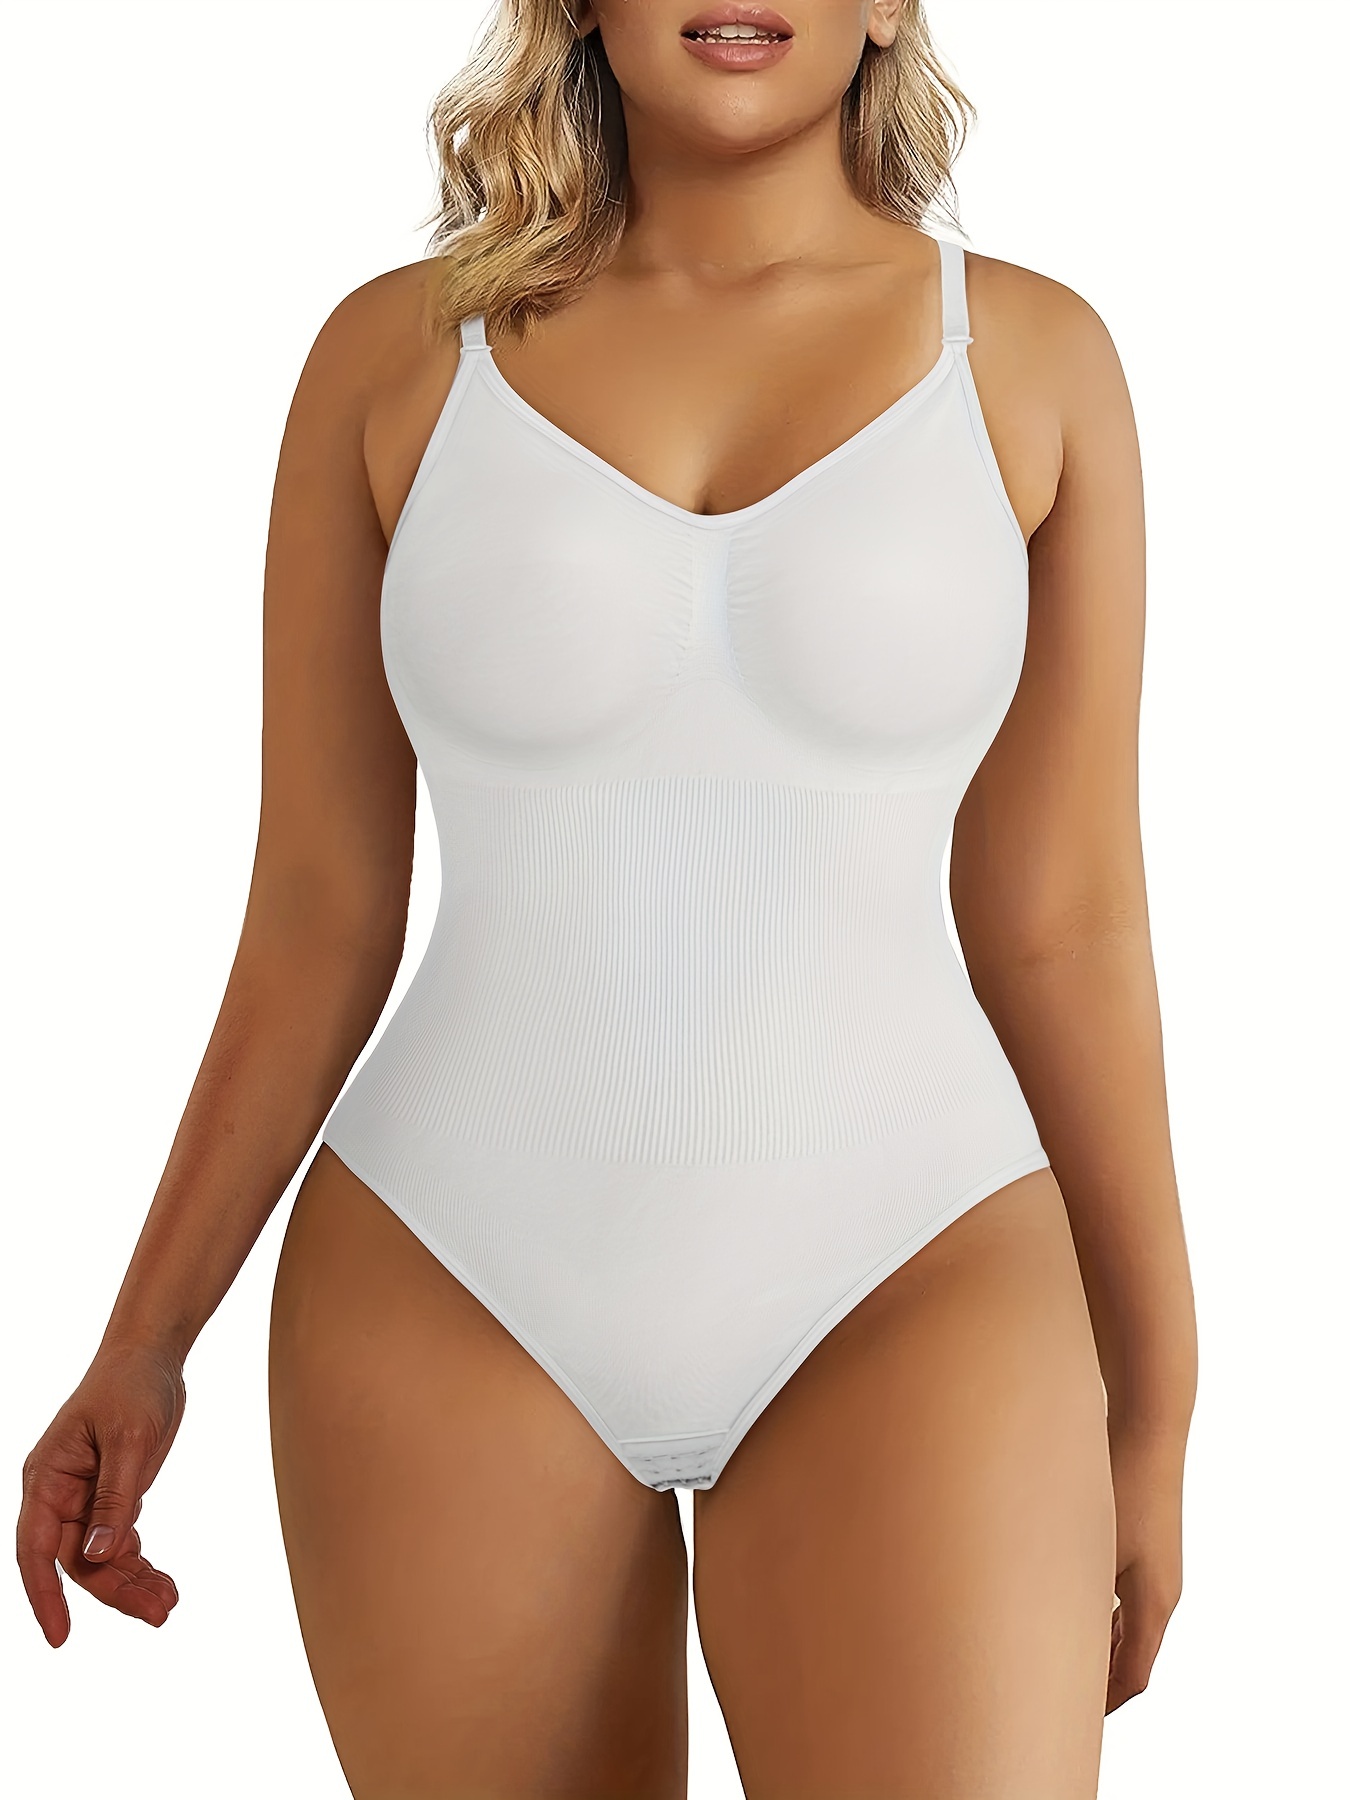 Body Shapewear Bodysuit With Cup Compression Shapers For Women